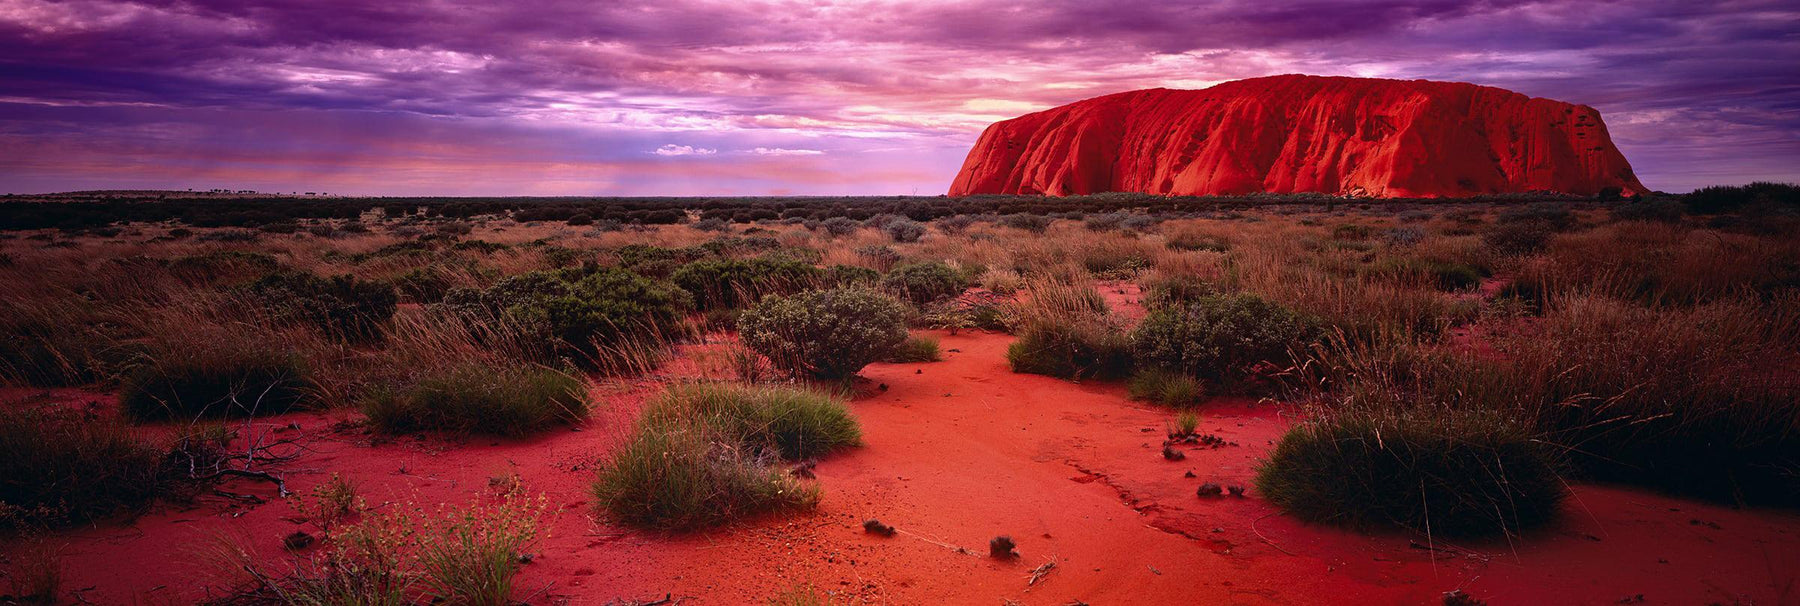 Red Dawn. Fine Photograph by Peter Lik.